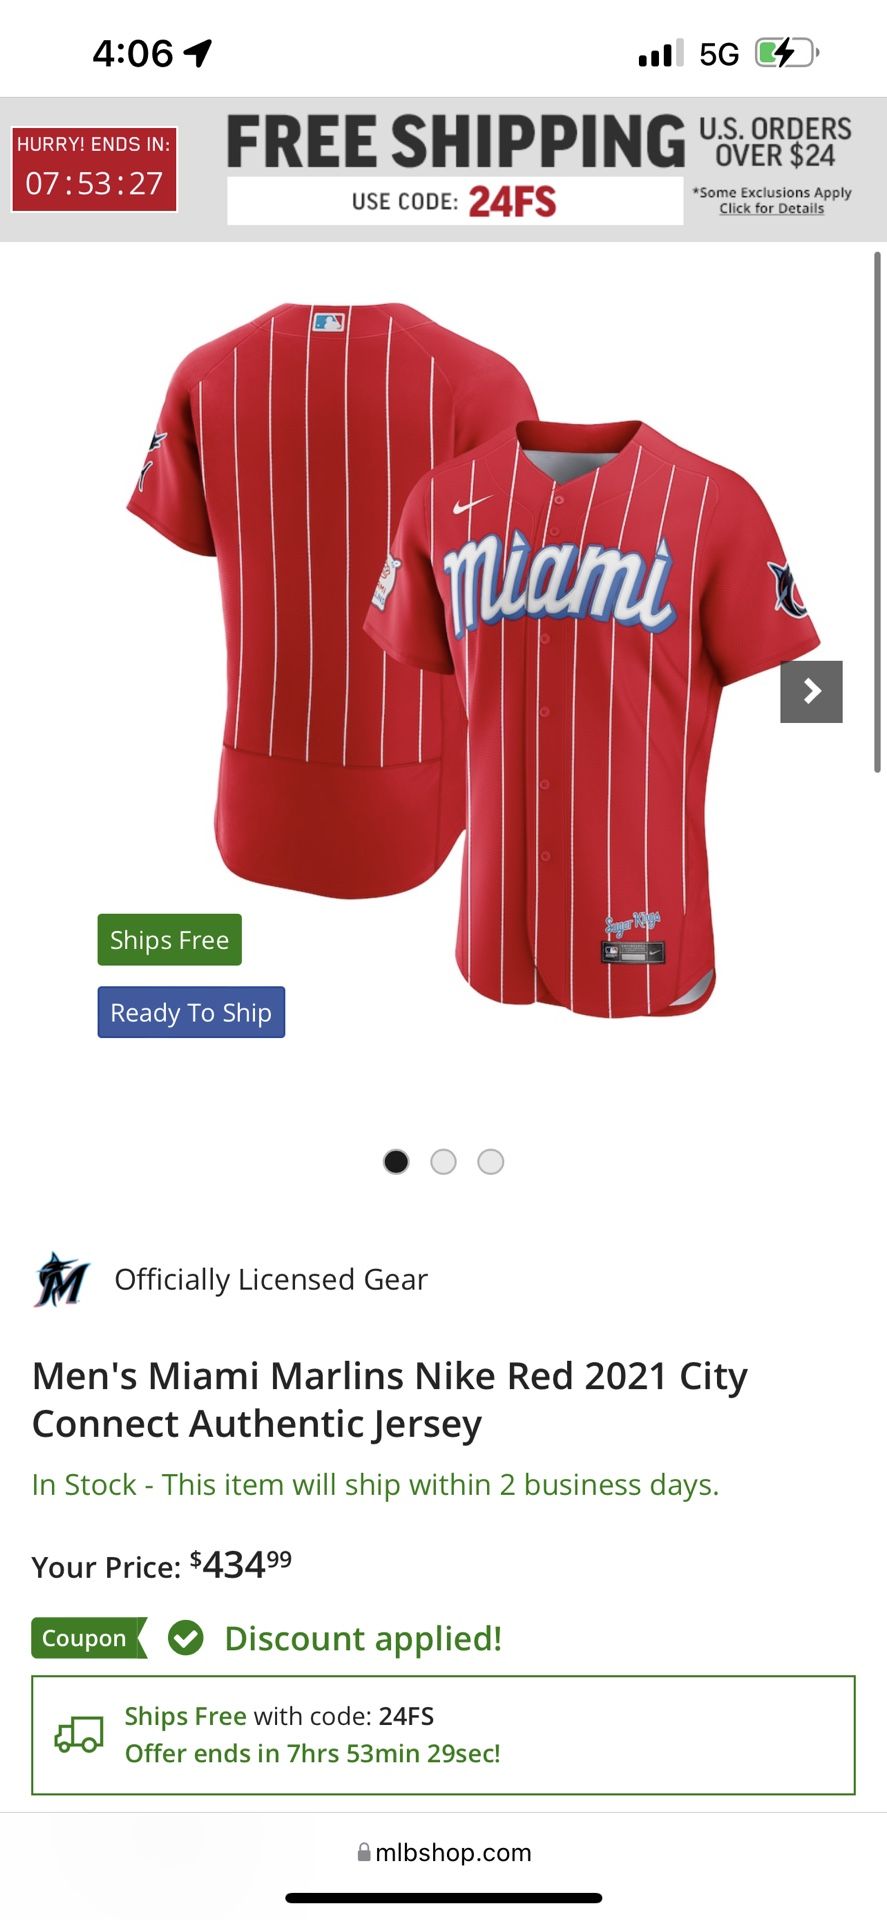 Men's Nike Red Miami Marlins 2021 City Connect Authentic Jersey